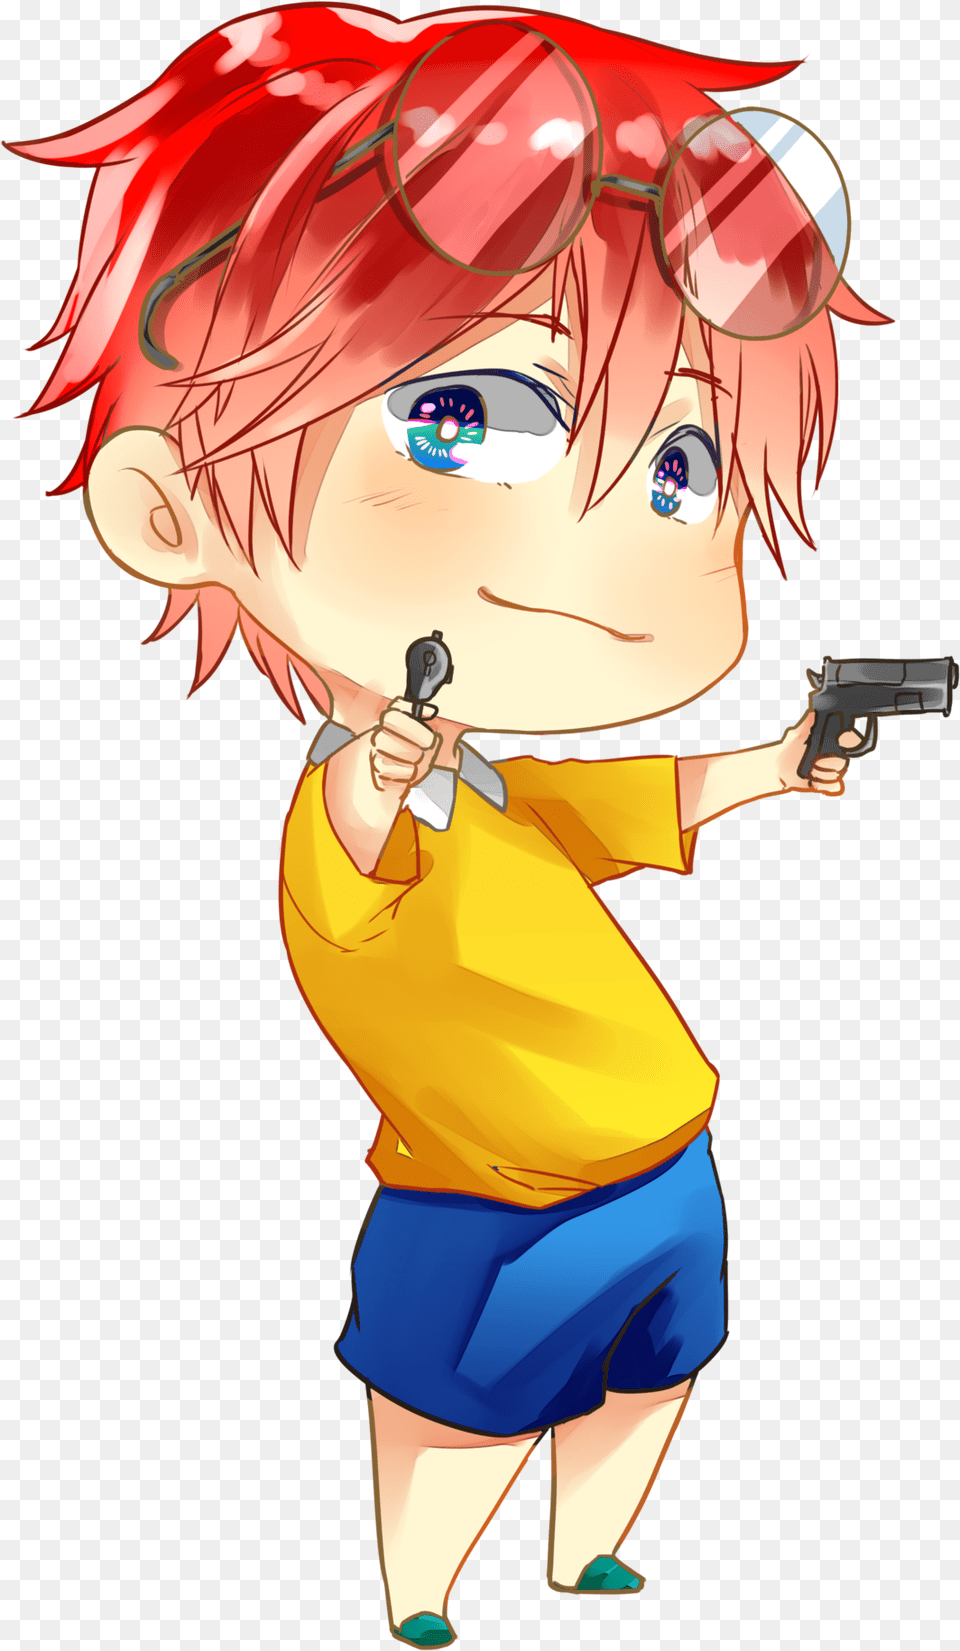 Biohazard Clipart Gamer Pencil And In Color Biohazard Red Haired Boy Anime, Book, Comics, Publication, Adult Png